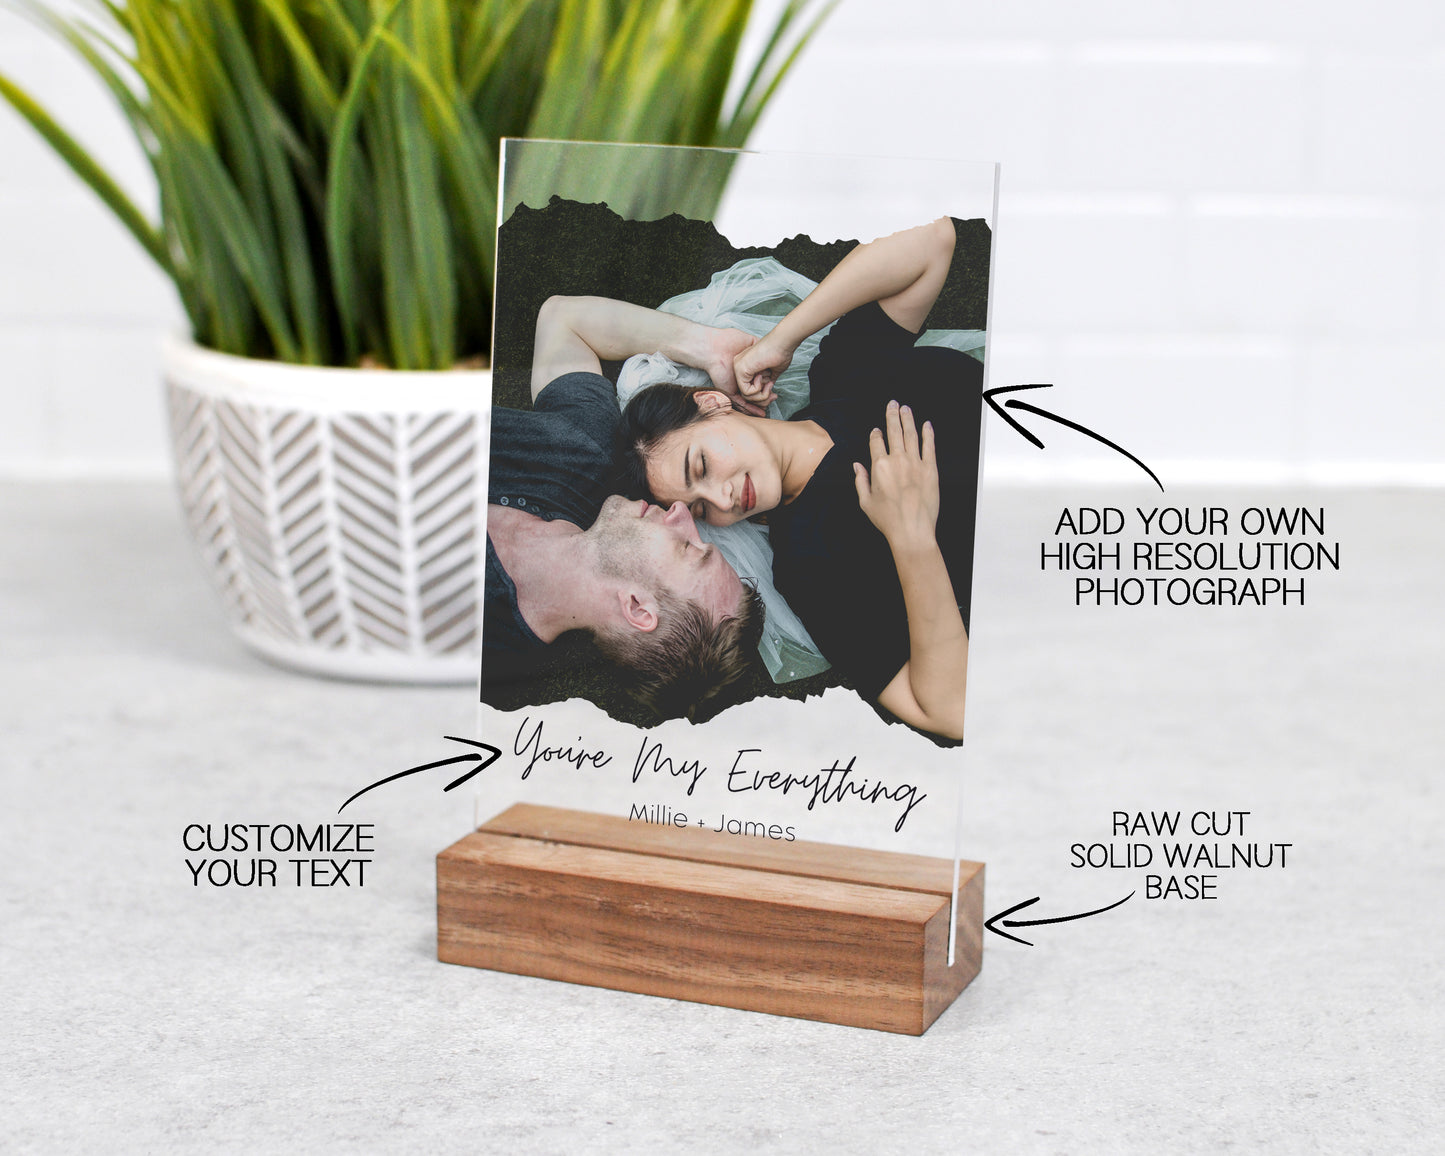 customize your text, add your own high resolution photograph, upgrade to add solid walnut base